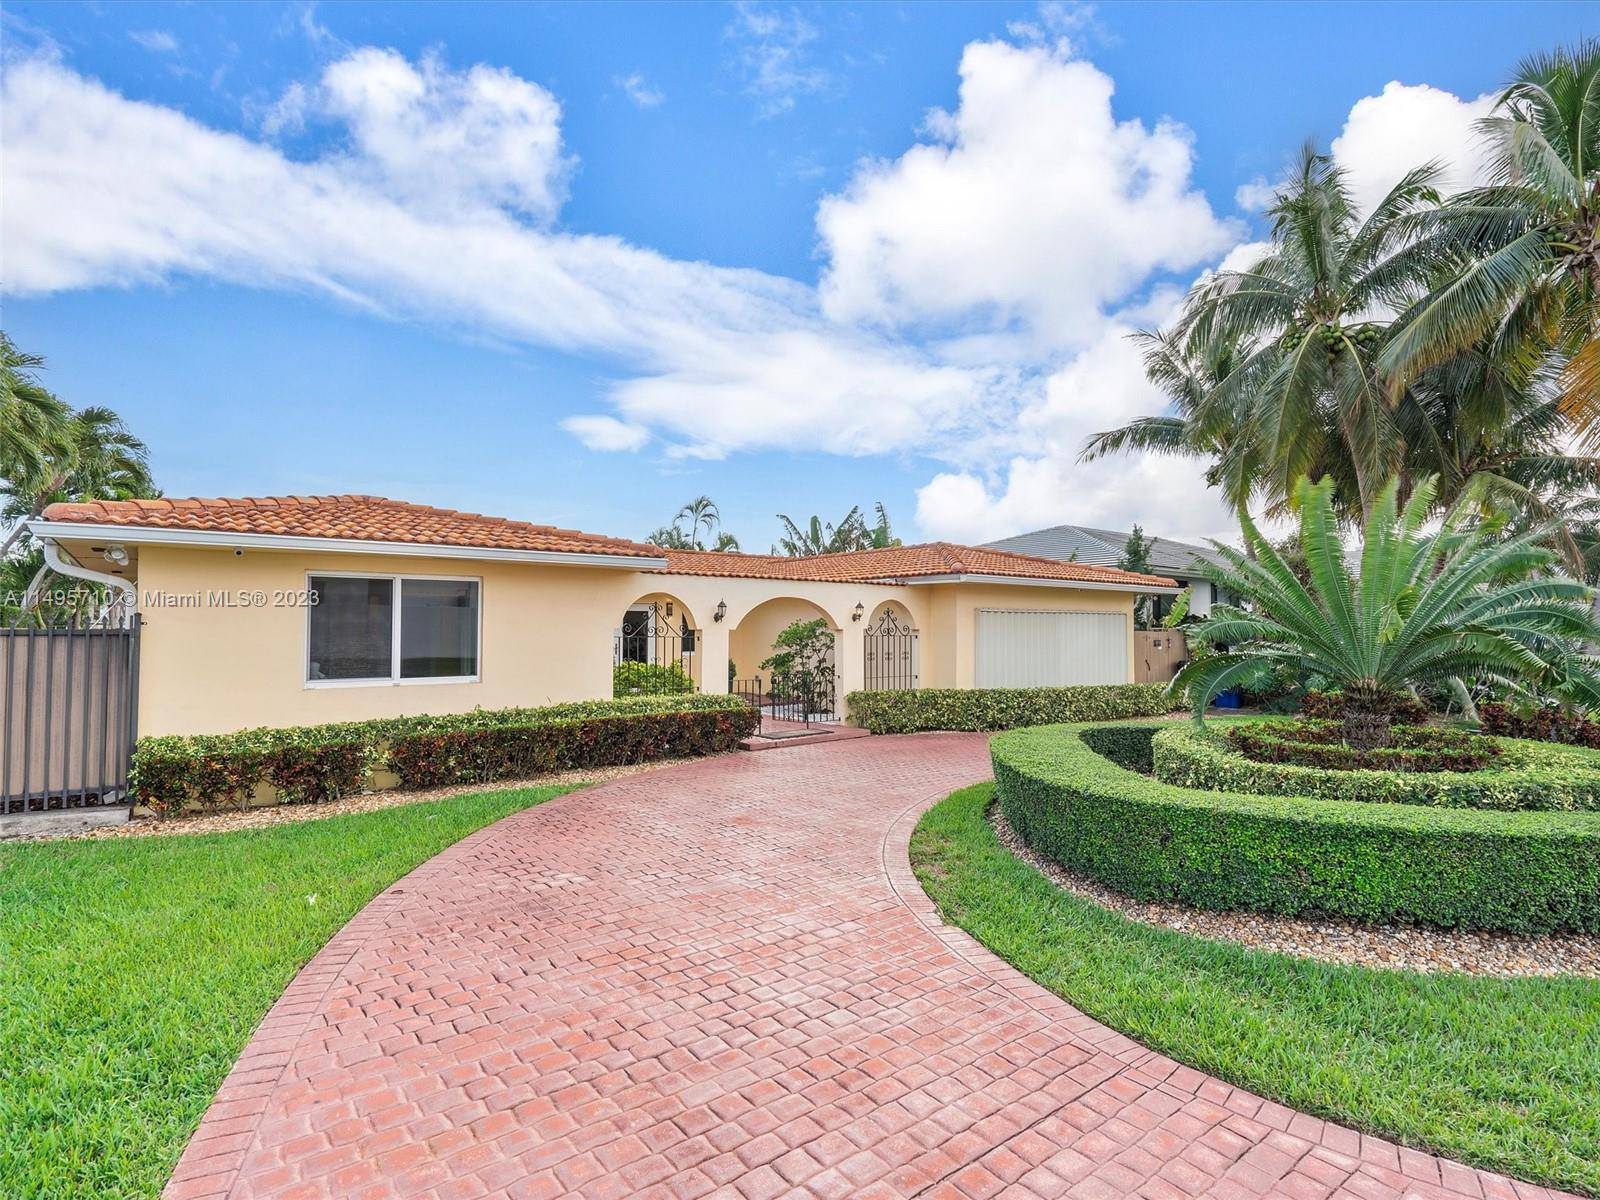 Welcome to your waterfront dream home in the exclusive, gated Eastern Shores neighborhood.